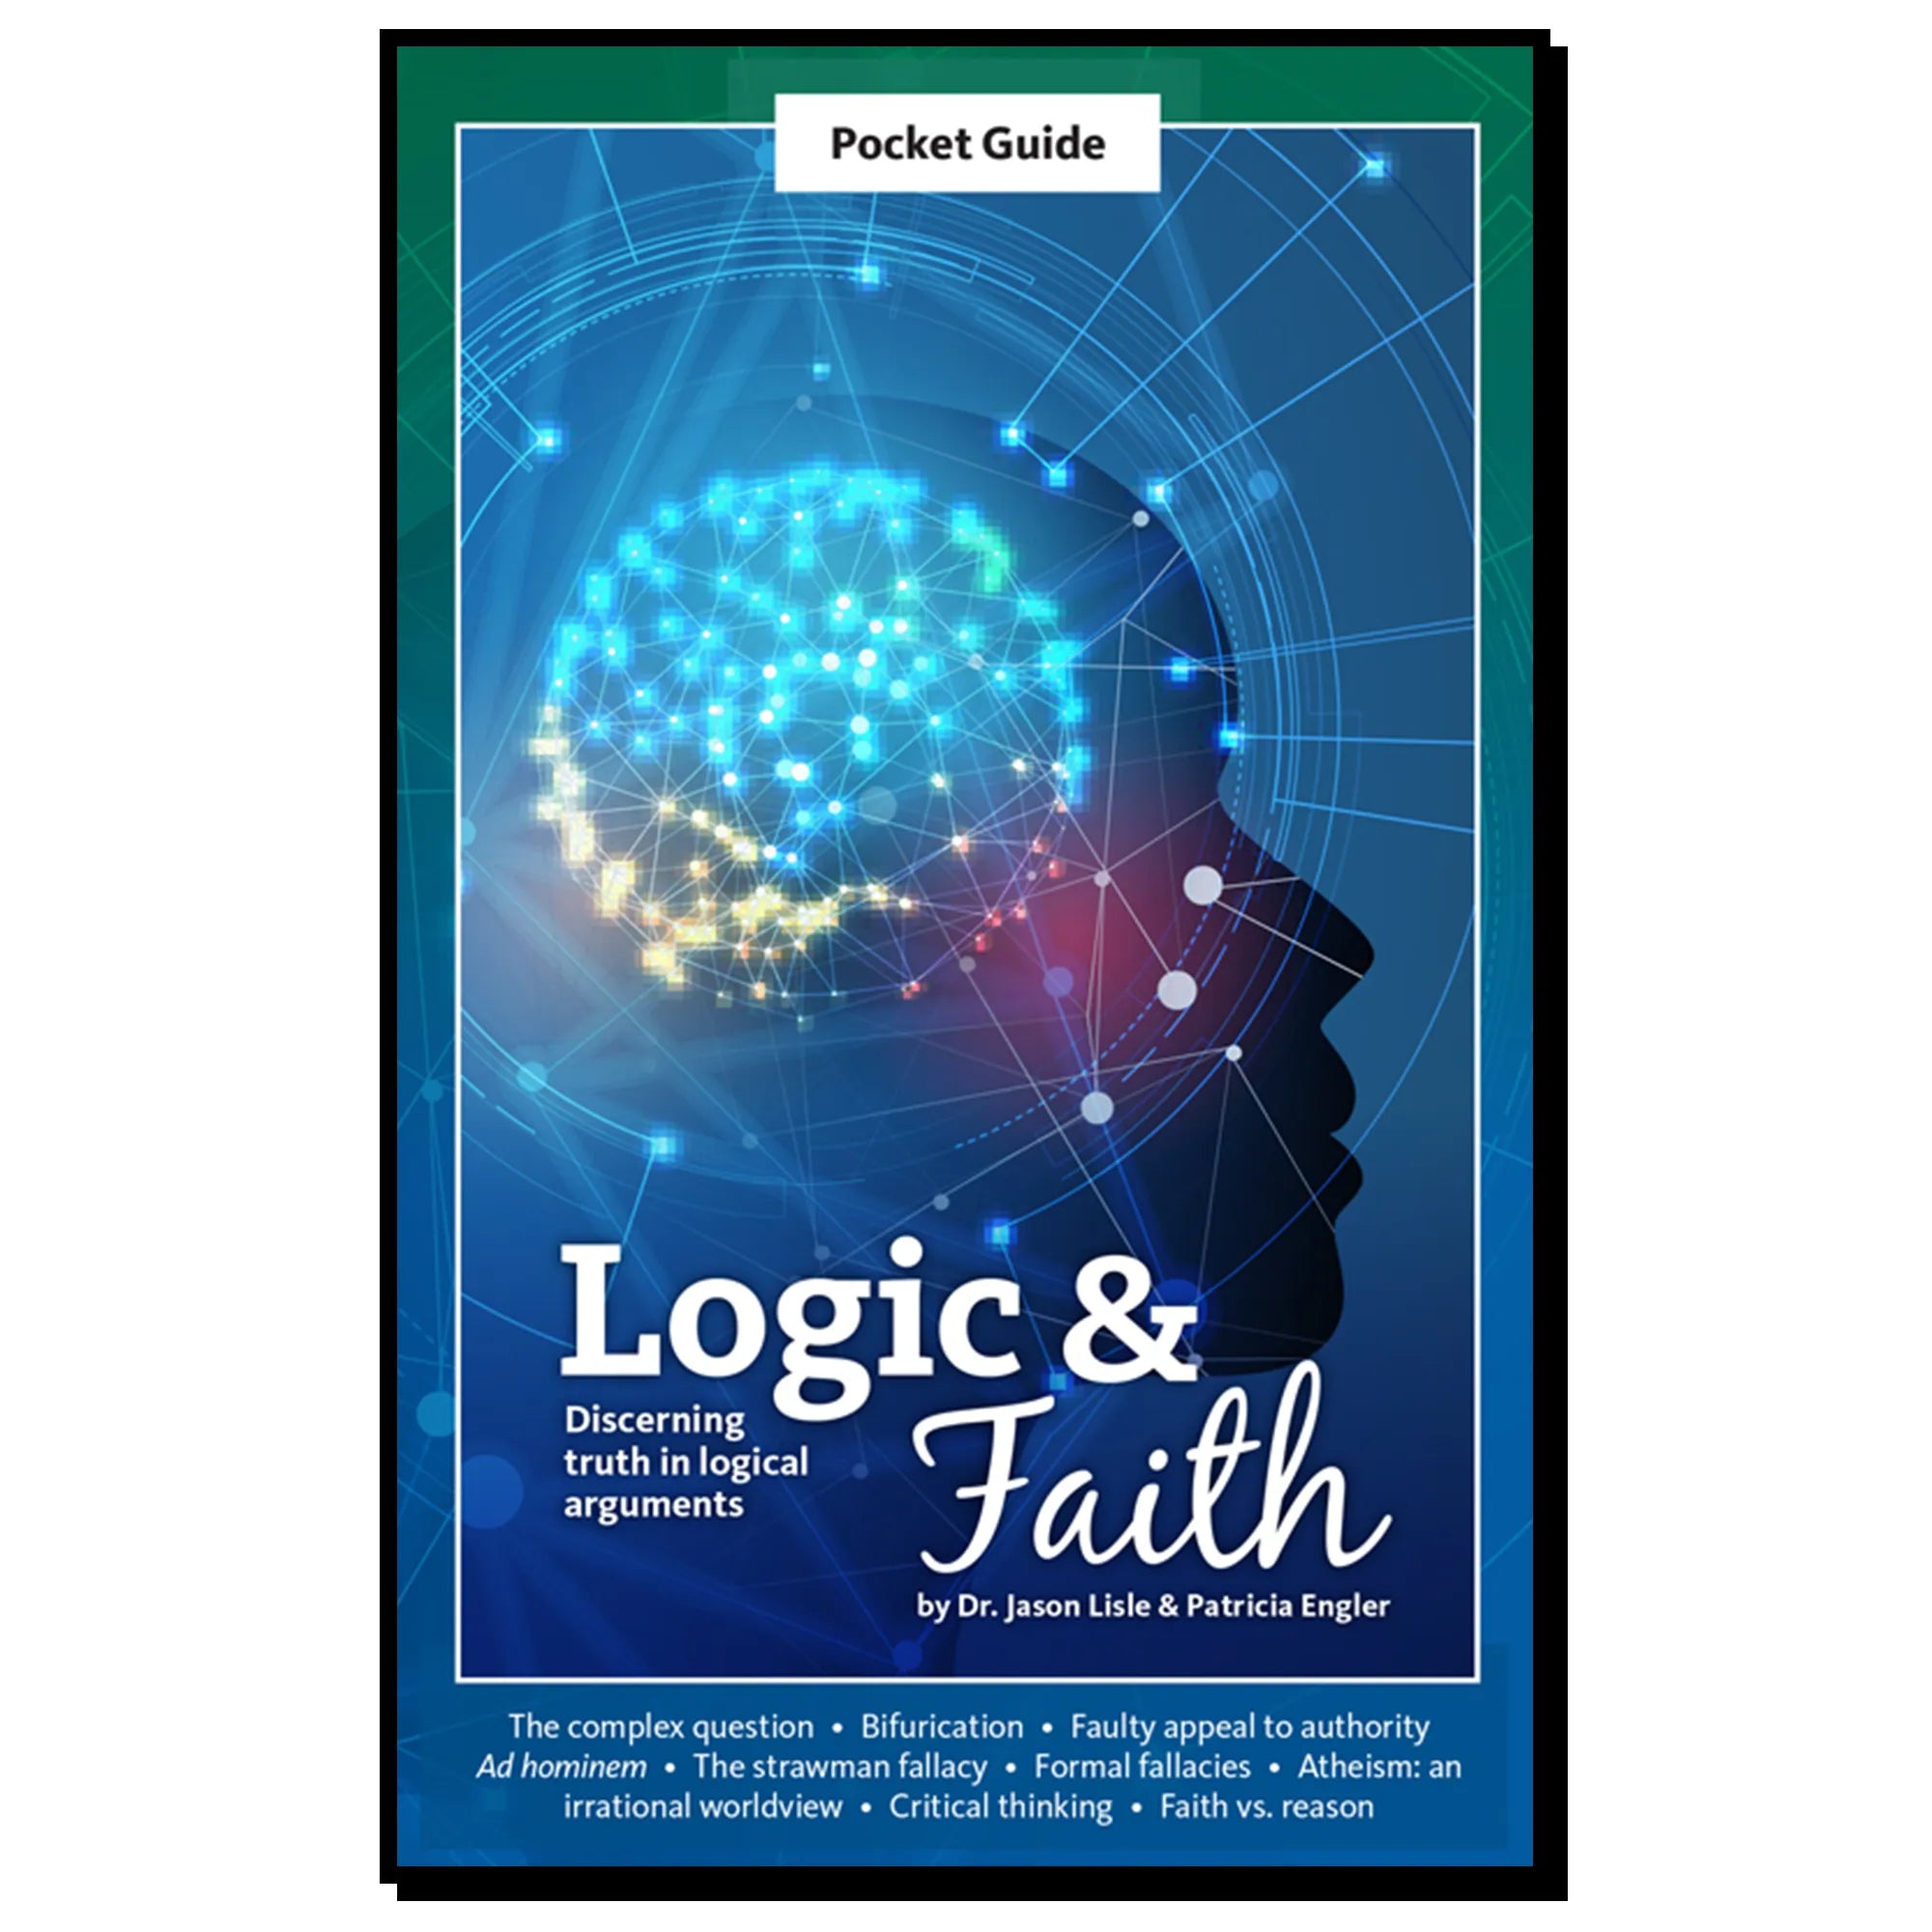 Pocket Guide - Logic & Faith: Discerning Truth in Logical Arguments - 96 Pages - Brown's Hobby & Game